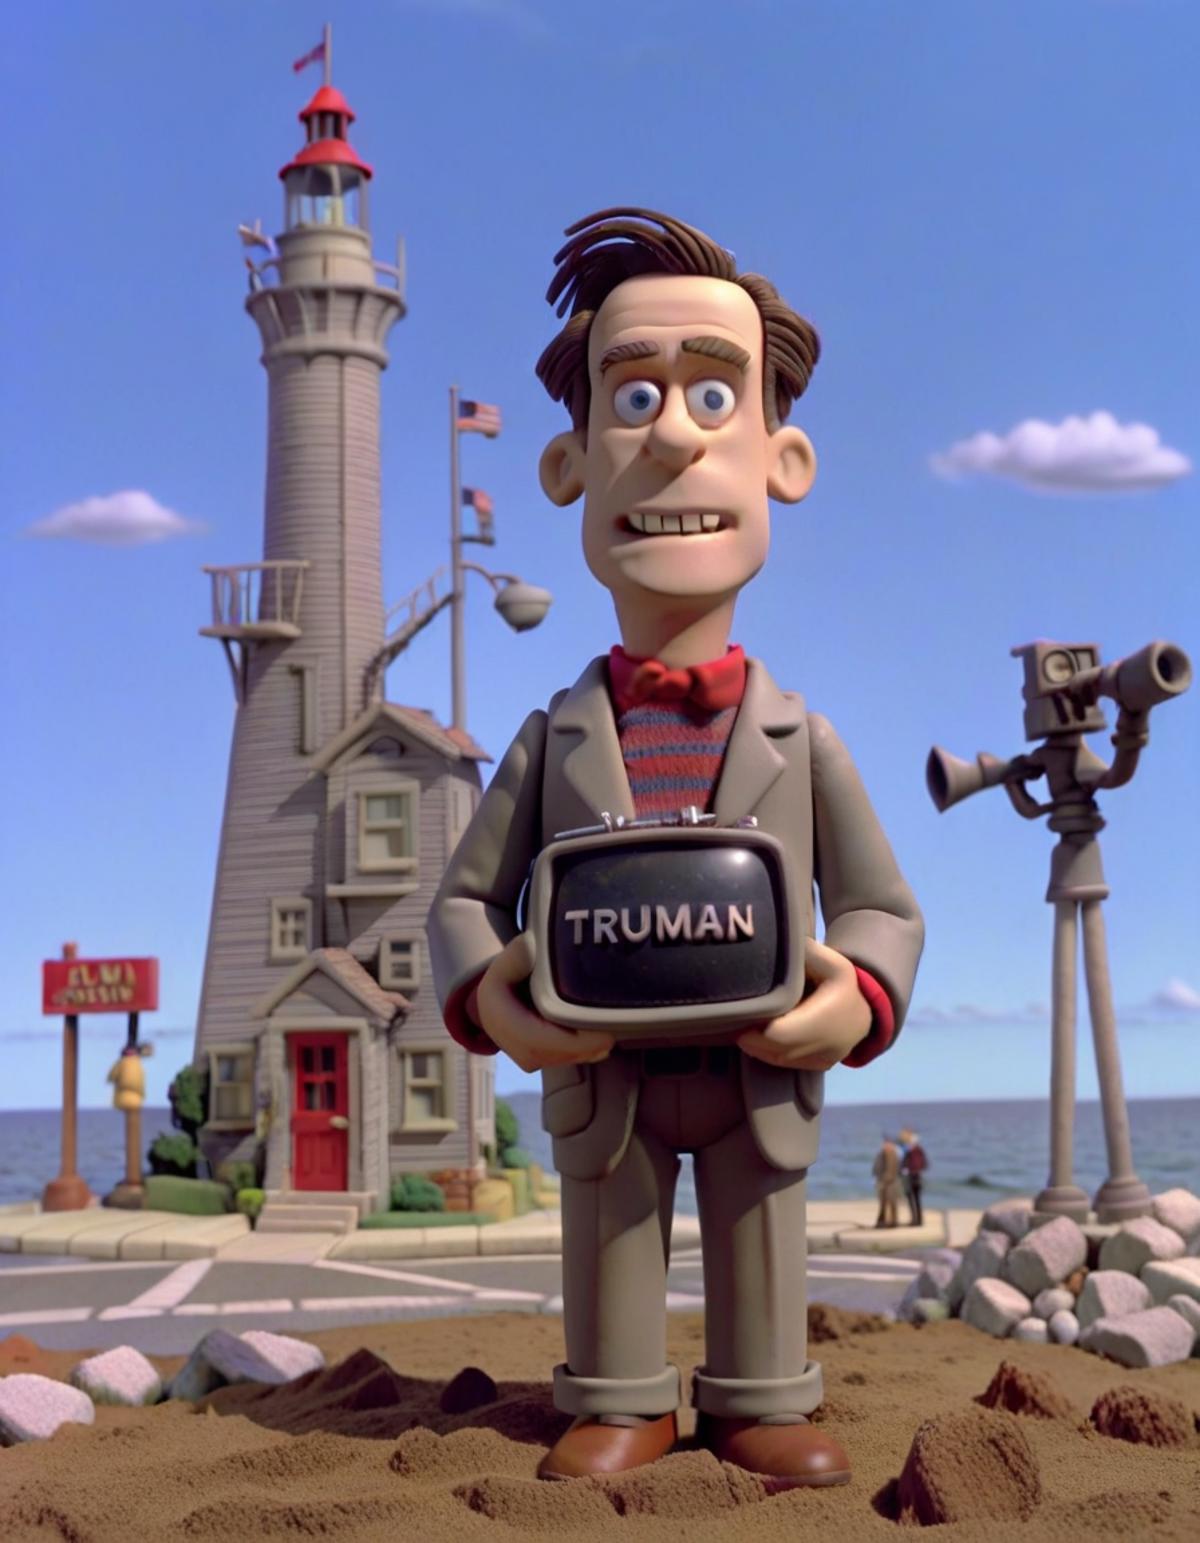 A cartoon character holding a briefcase in front of a lighthouse.